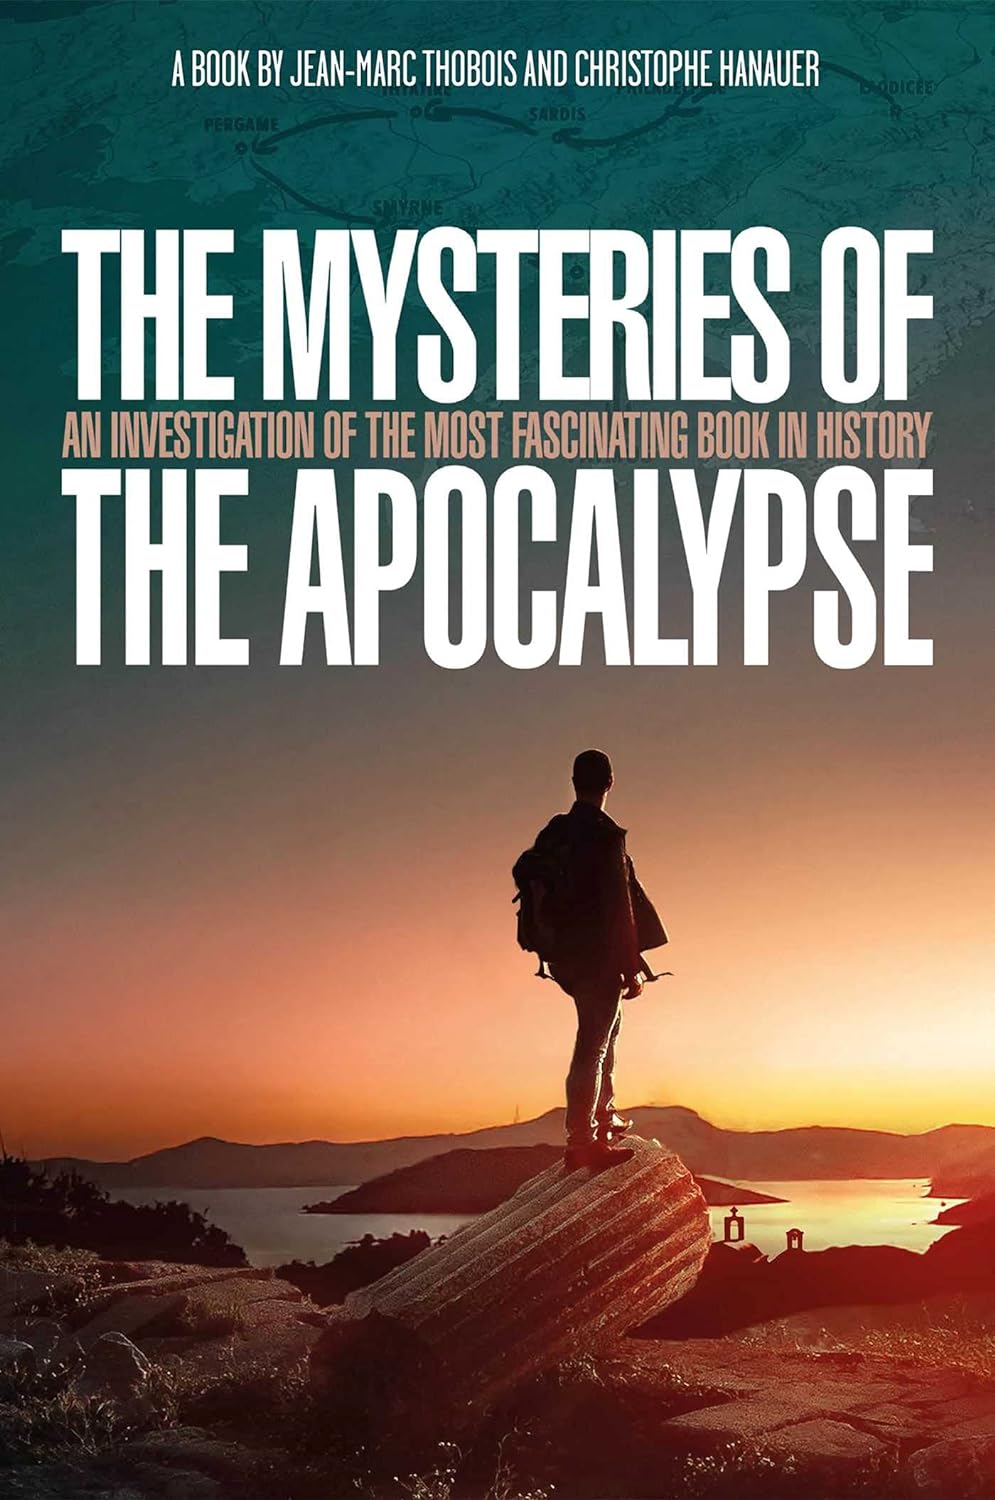 The Mysteries of the Apocalypse - An Investigation Into the Most Fascinating Book in History